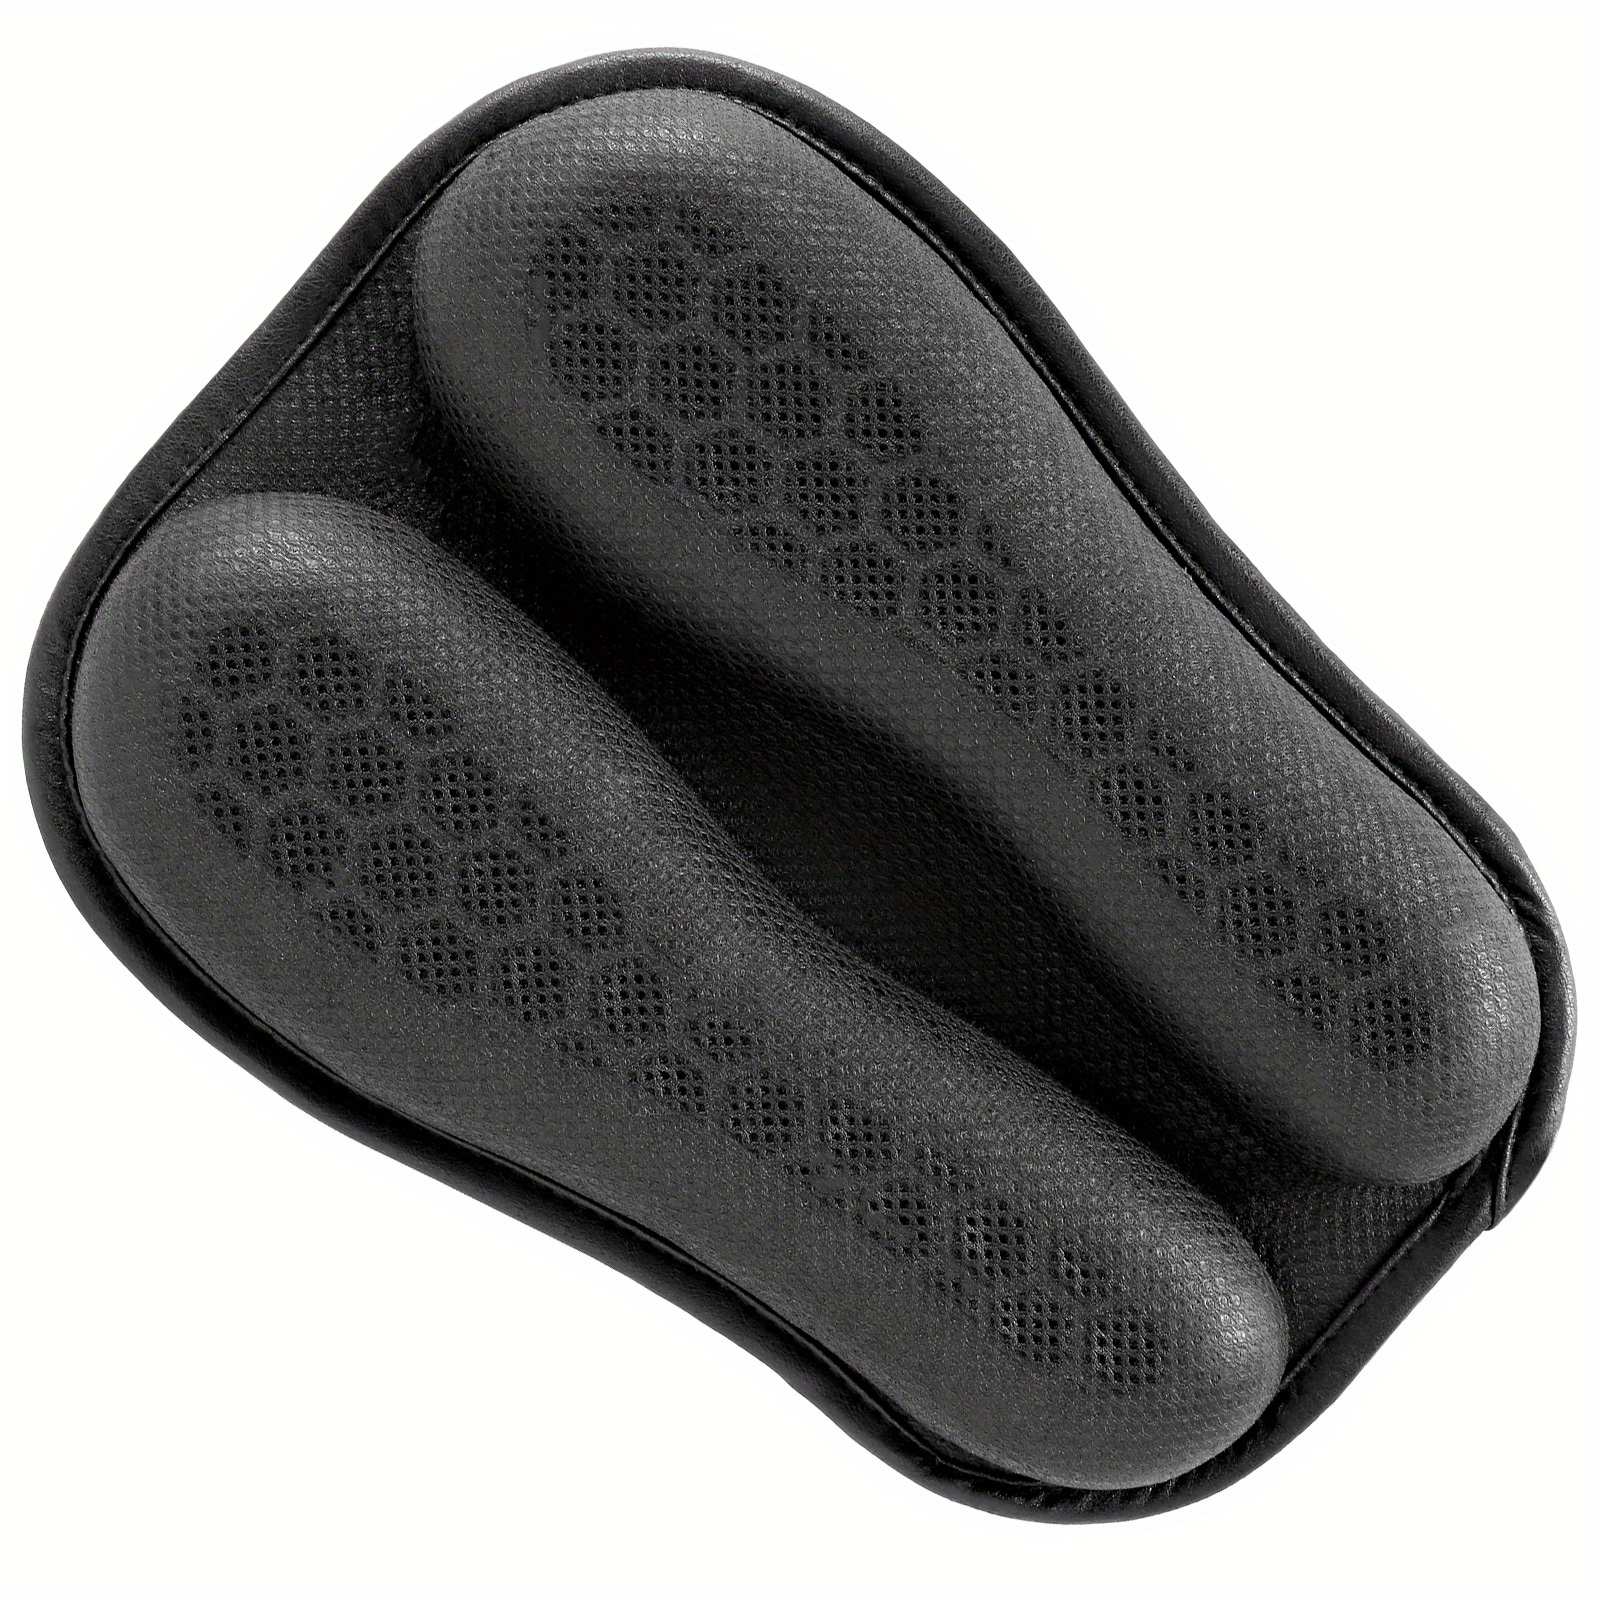 ASI Air Seat Innovations Motorcycle Air Seat Cushion - Pressure Relief Pad  - Touring Saddles Reduces Vibration - Medium Seat Size 13 x 12.5